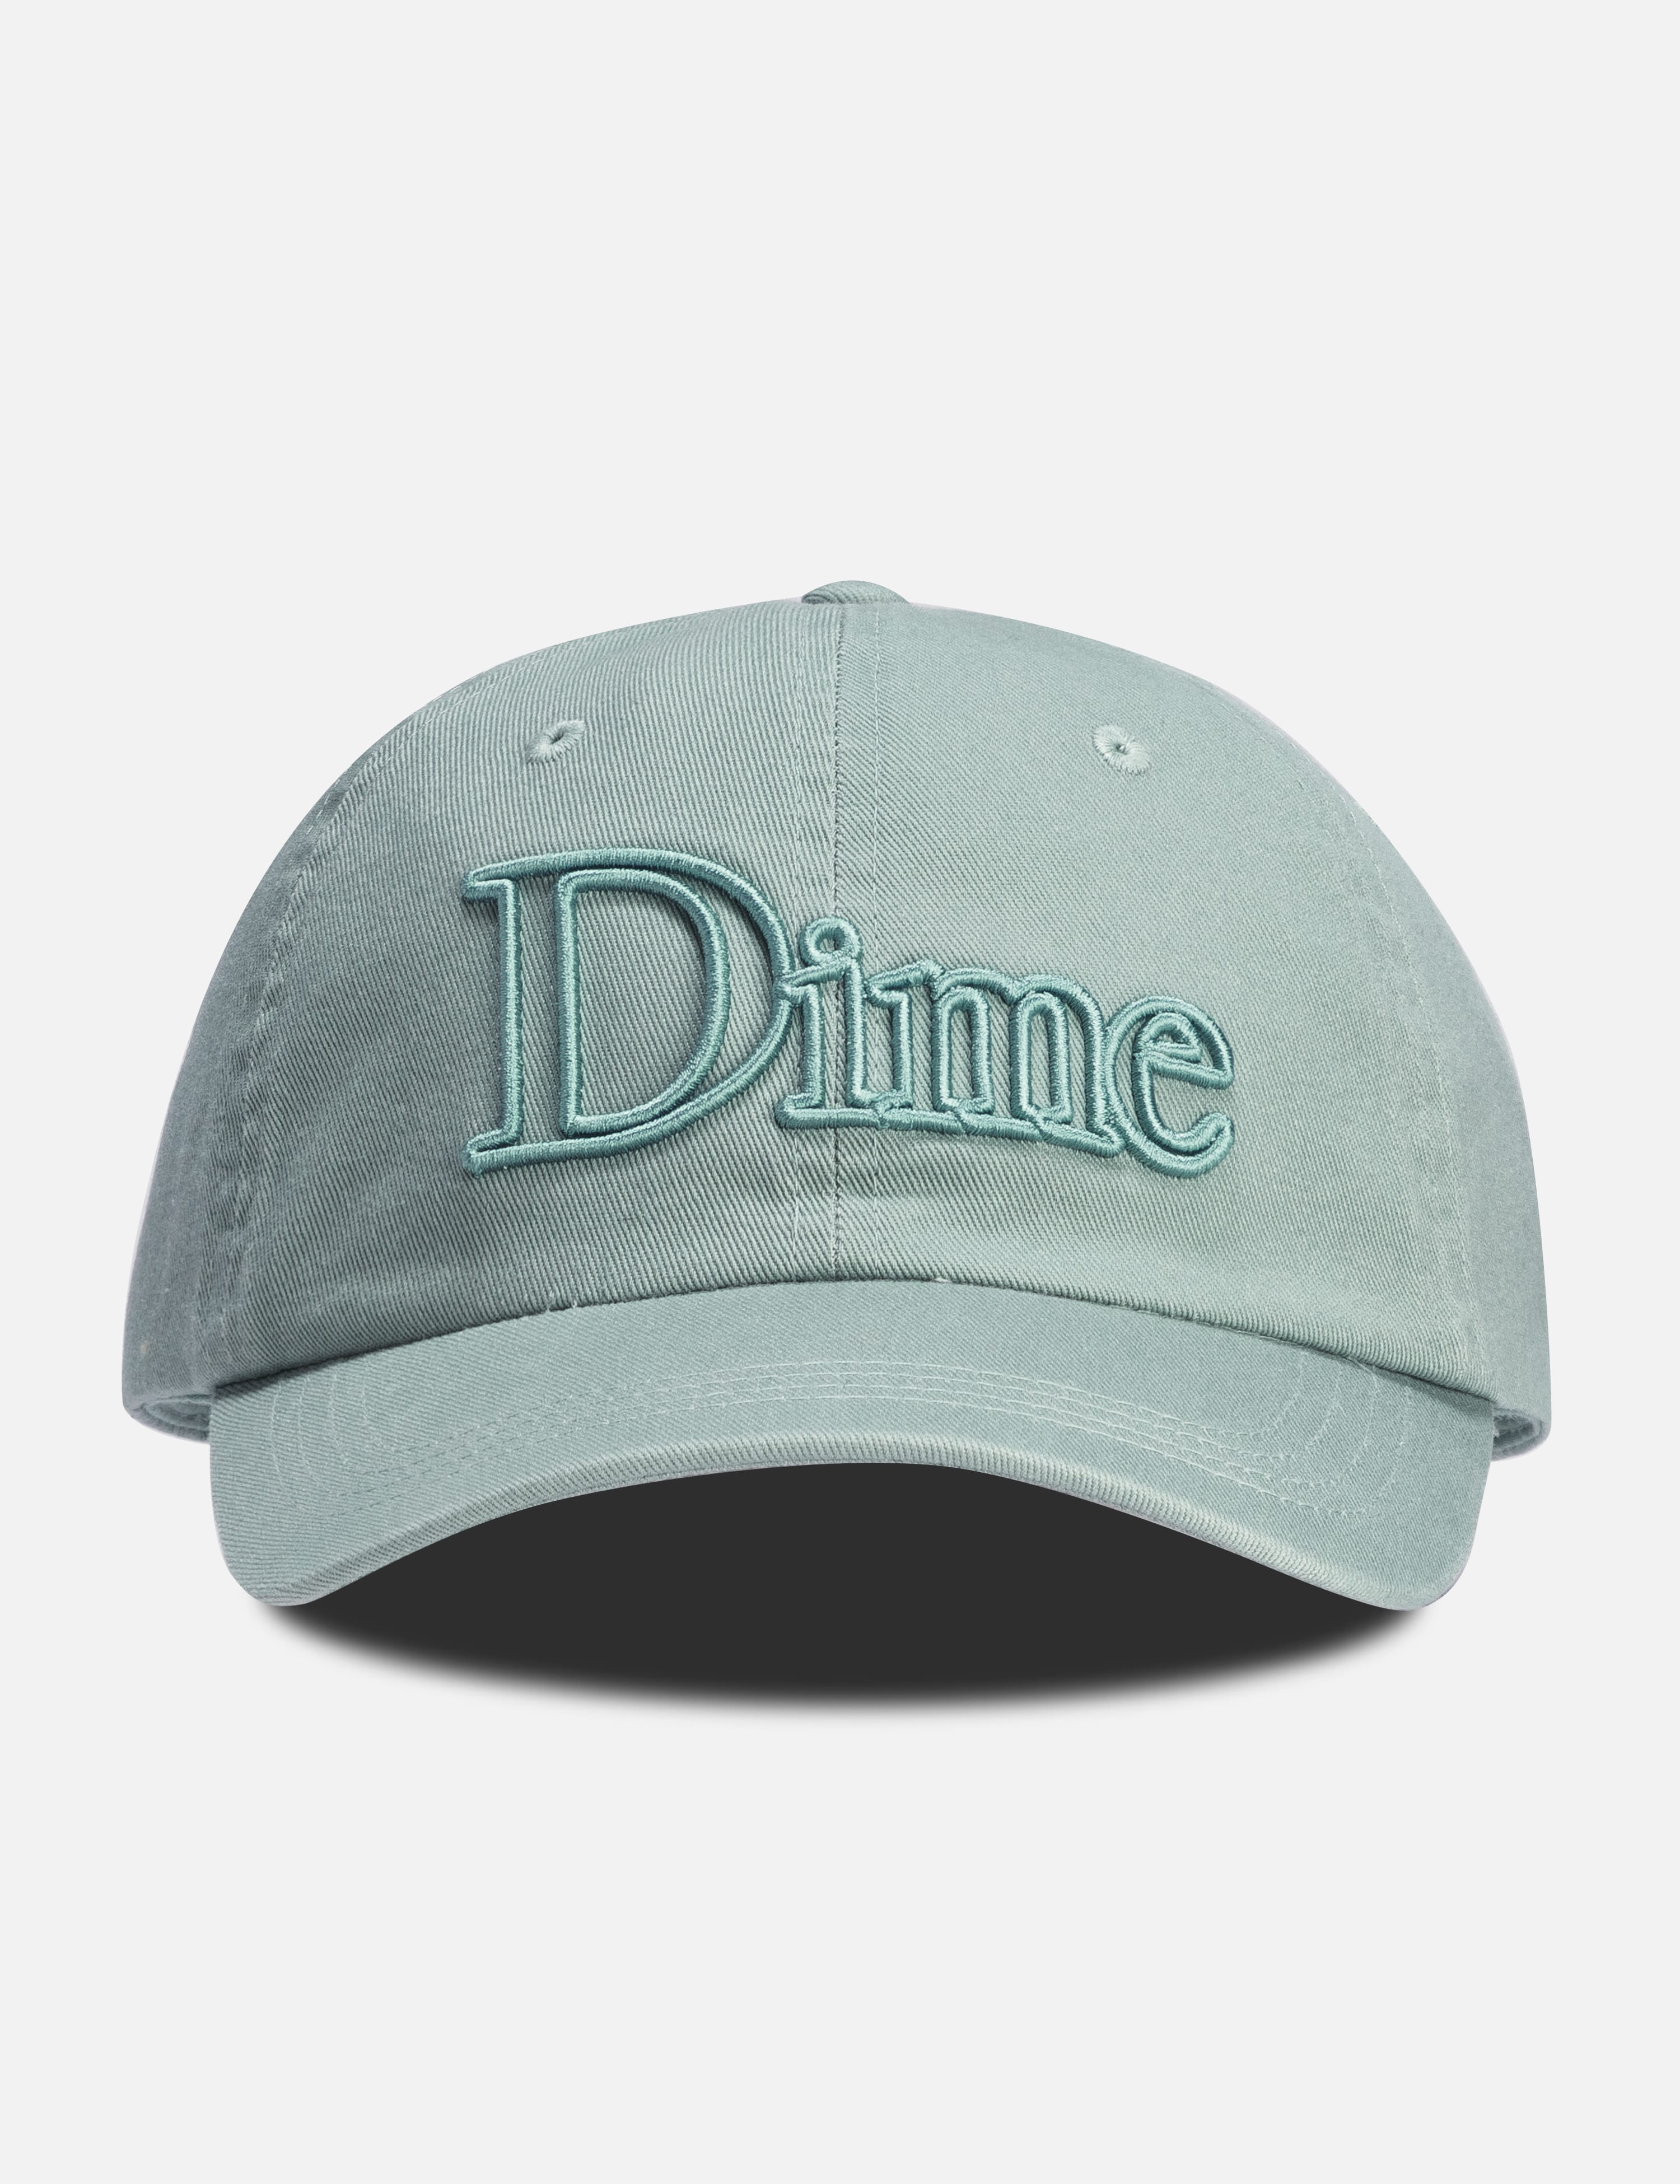 Dime - Dime Classic 3D Cap | HBX - Globally Curated Fashion and